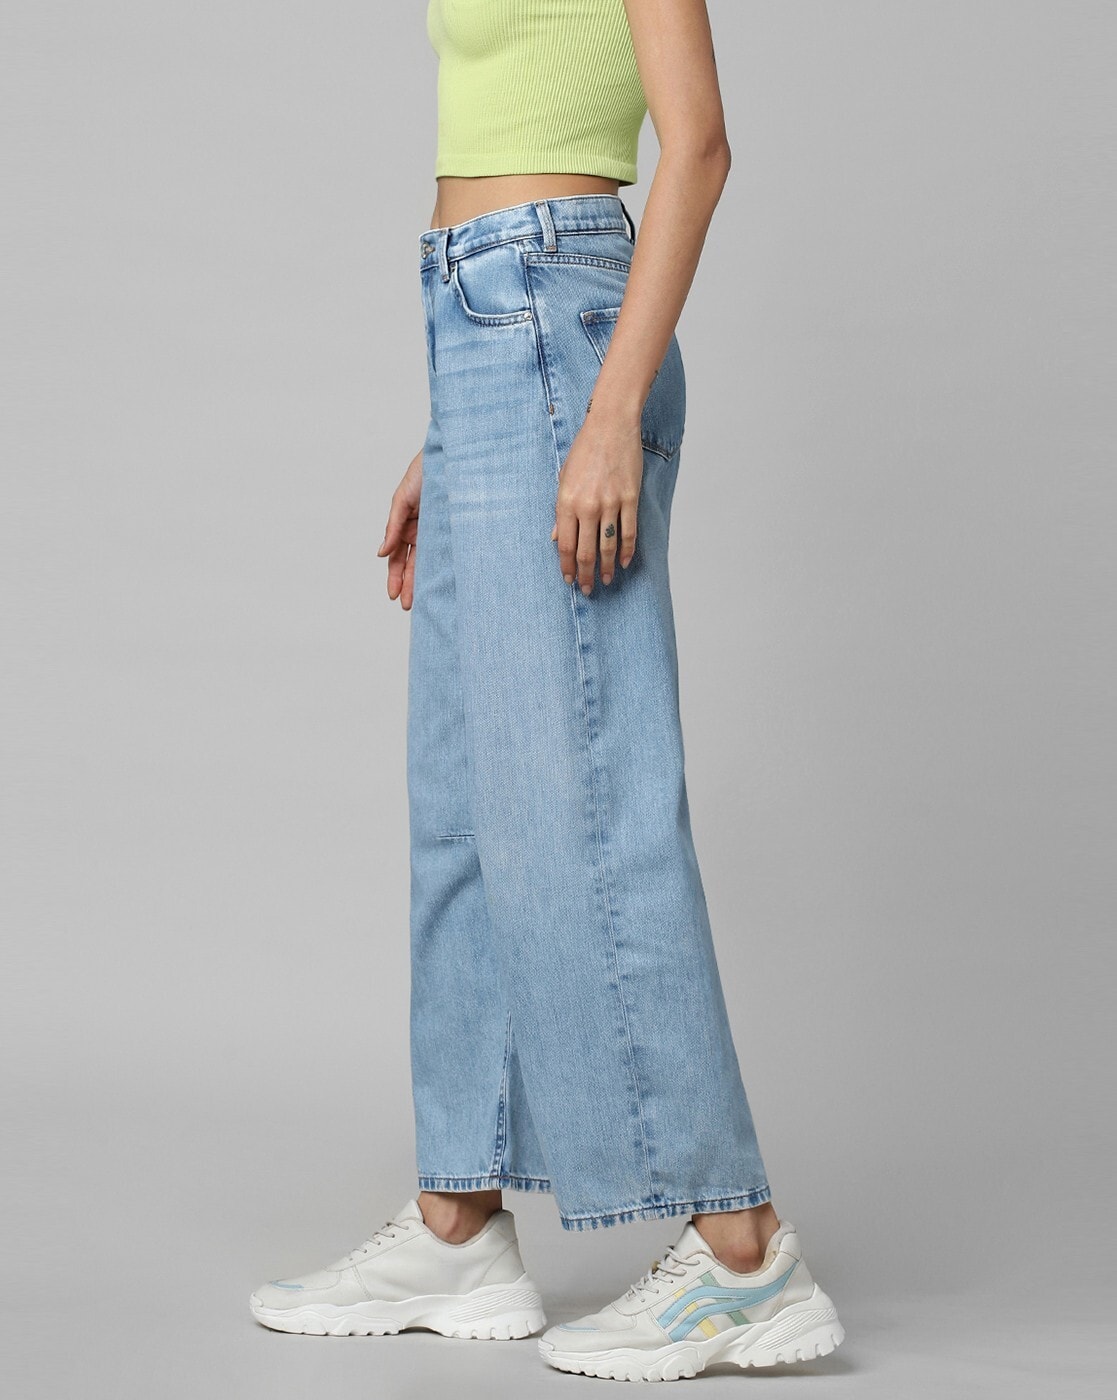 Shop for Baggy Jeans for Women Online Starting @ ₹999